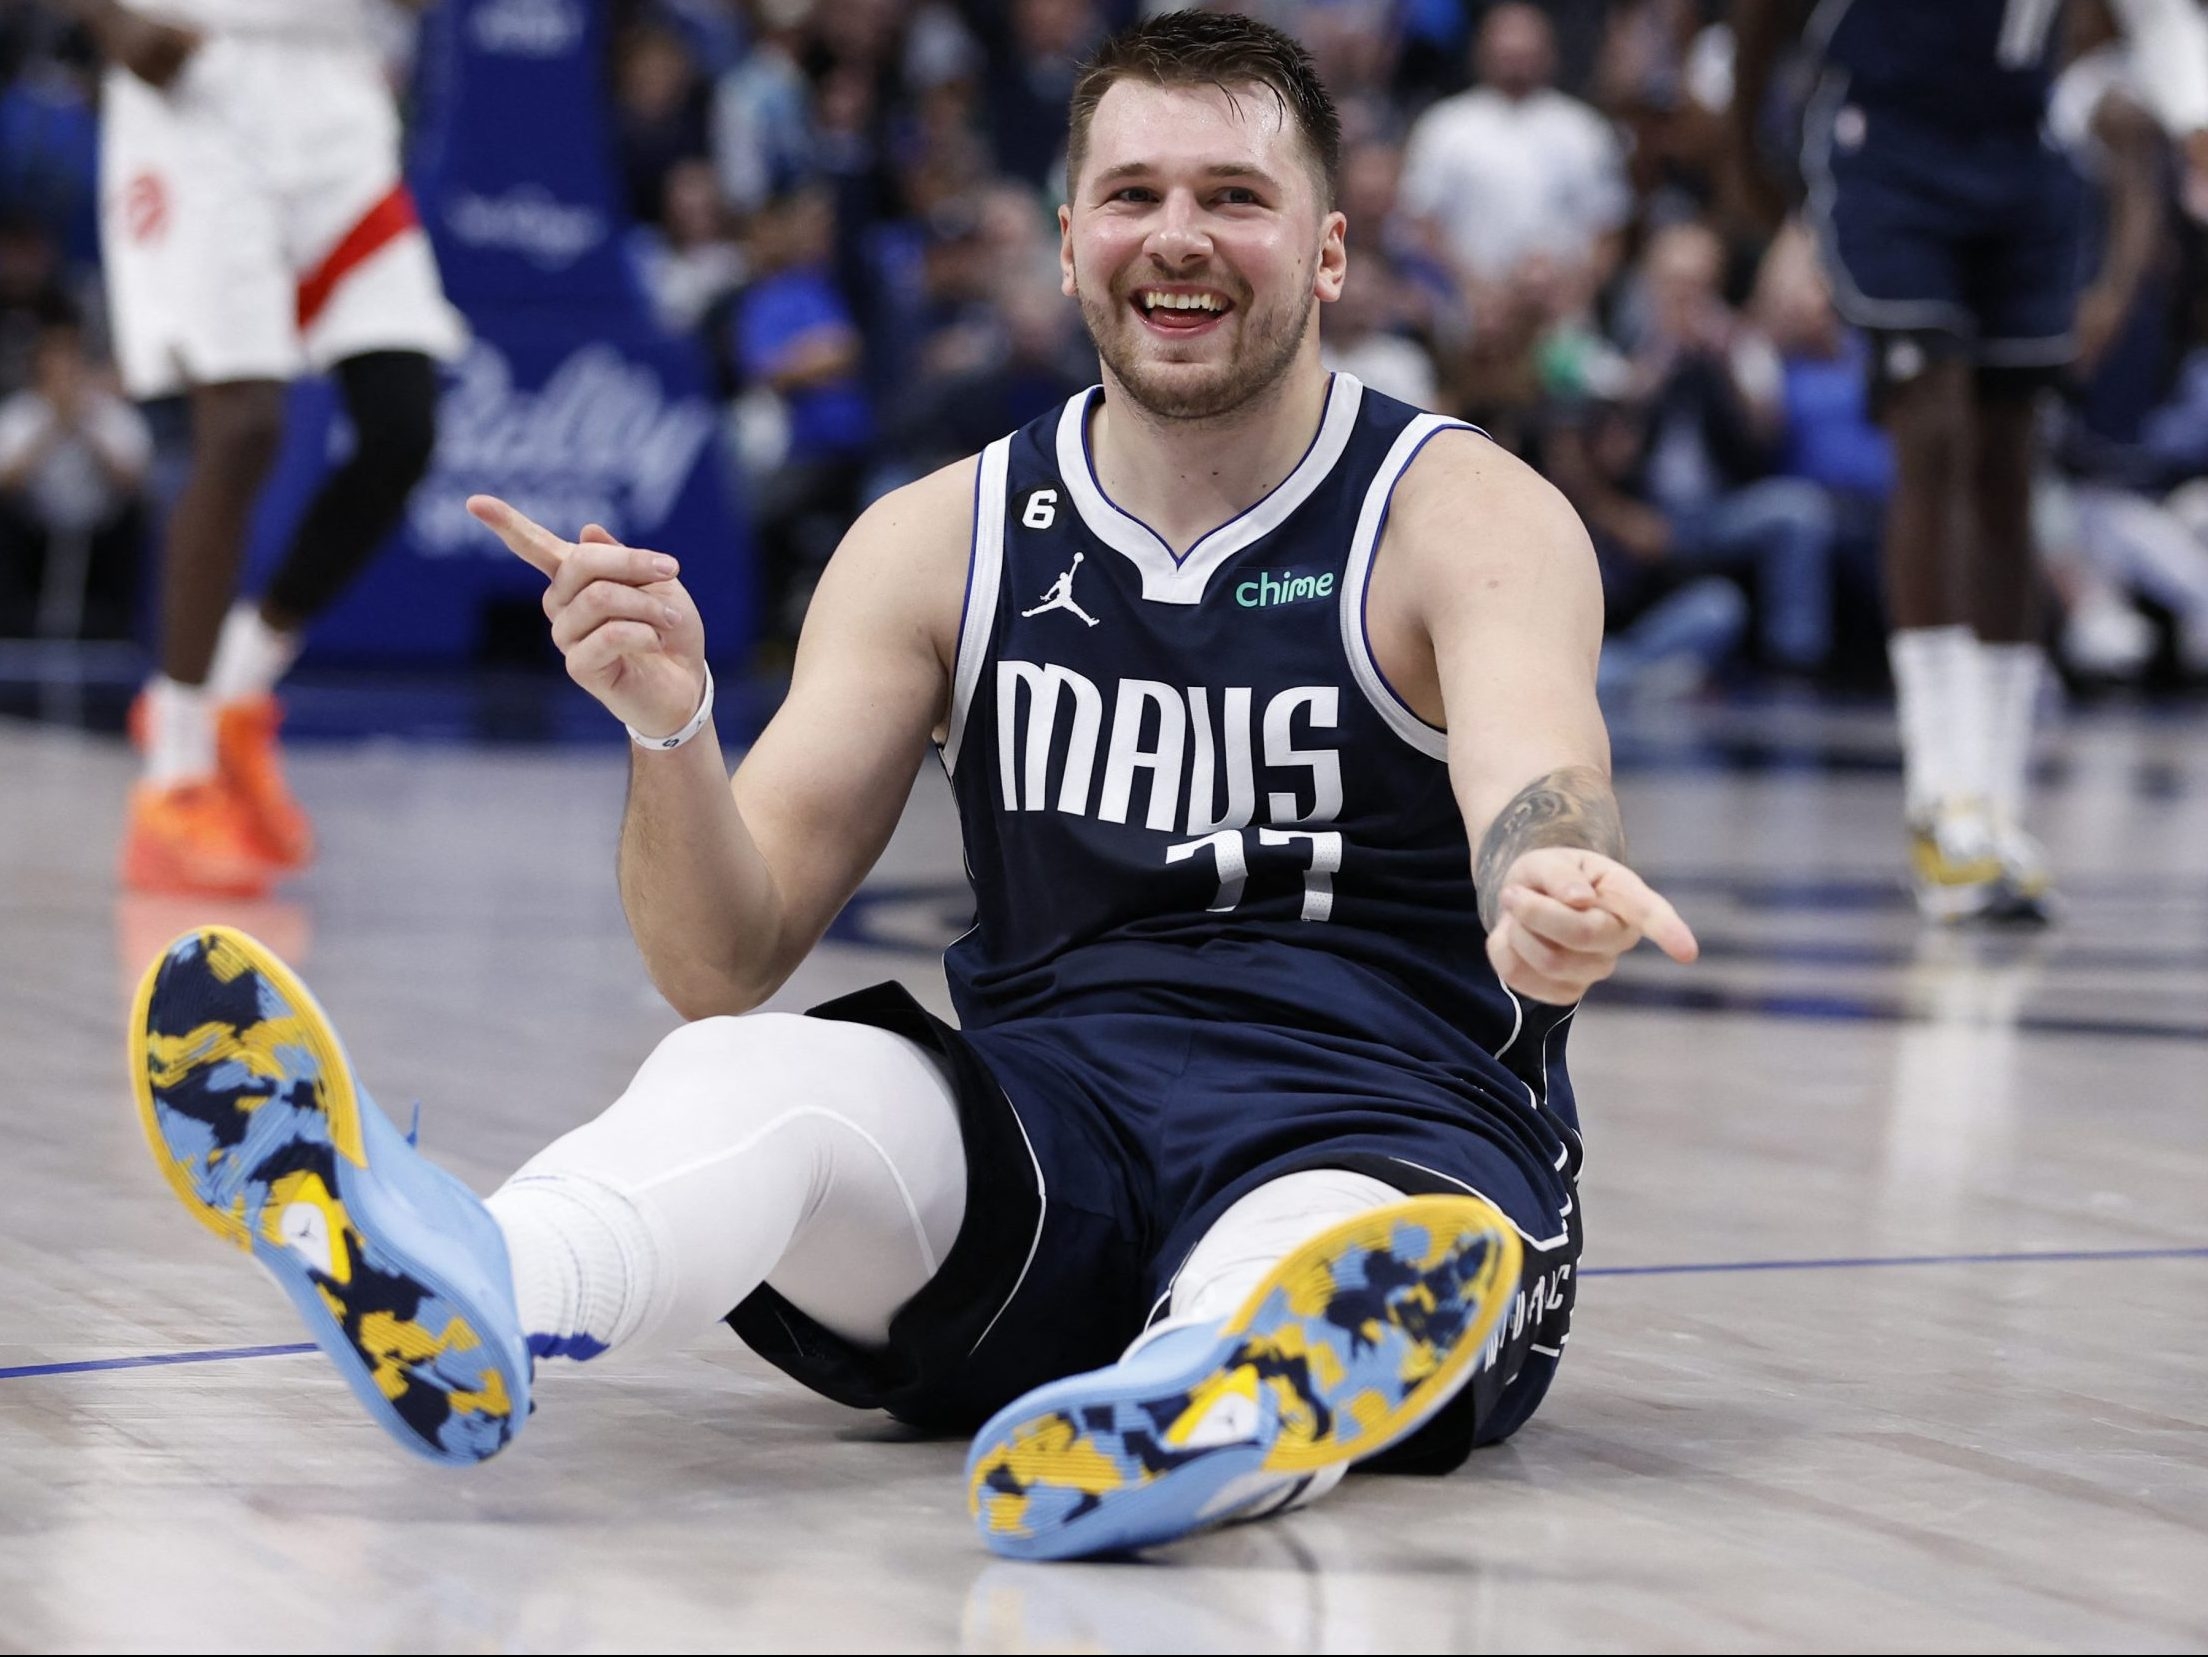 Stopping Luka Doncic a whole lot tougher right now for Raptors